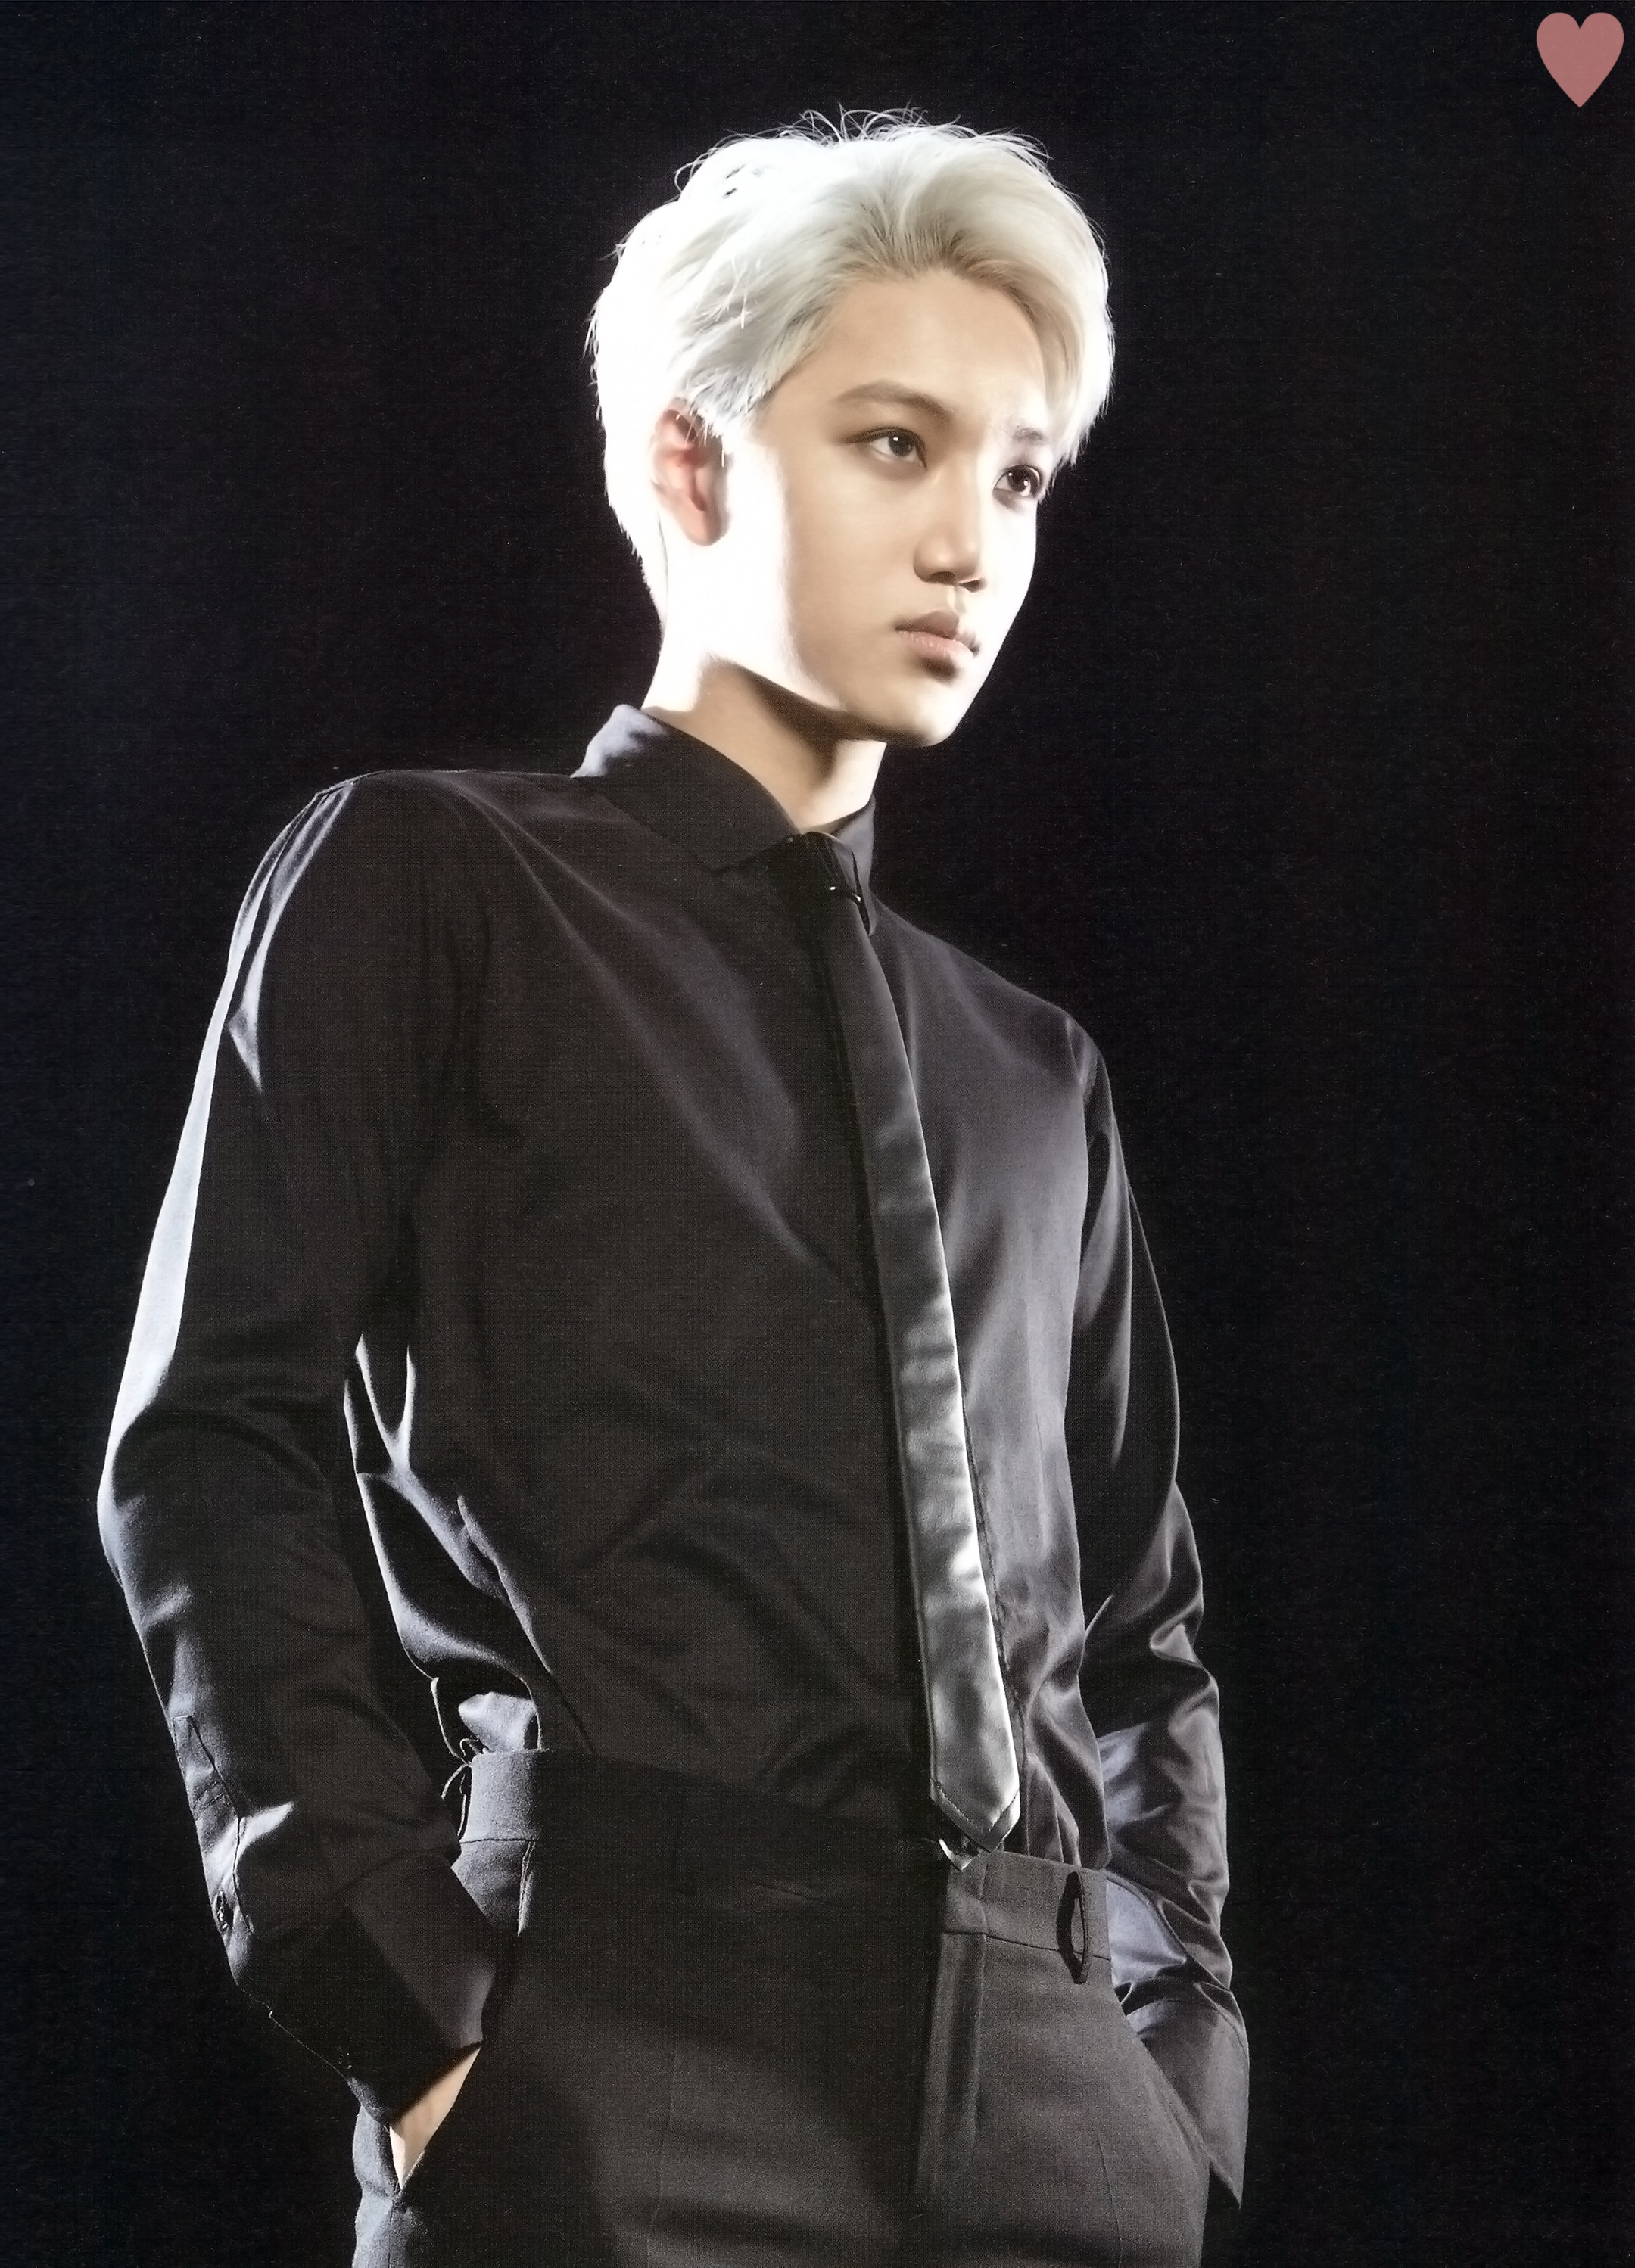 https://psychofriend.files.wordpress.com/2014/05/140524-kai-exo-new-picture-for-brochure-concert-exo-from-exoplanet-1-scan-by-yehet0408-1.jpg